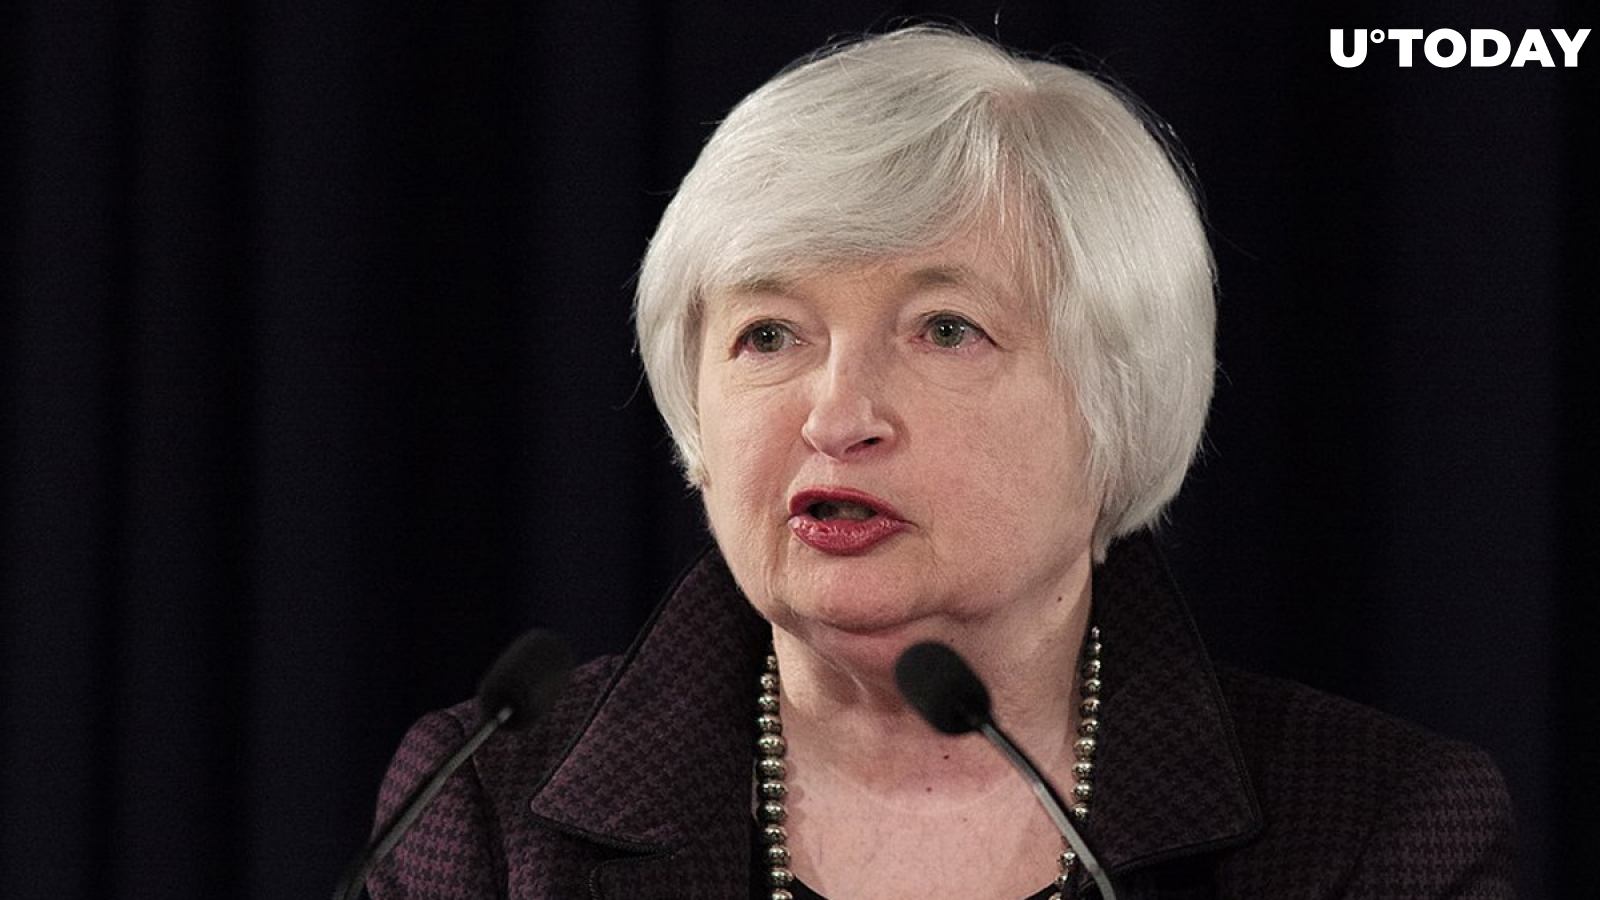 Bitcoin Tanks to $47K as Janet Yellen Calls It "Extremely Inefficient"